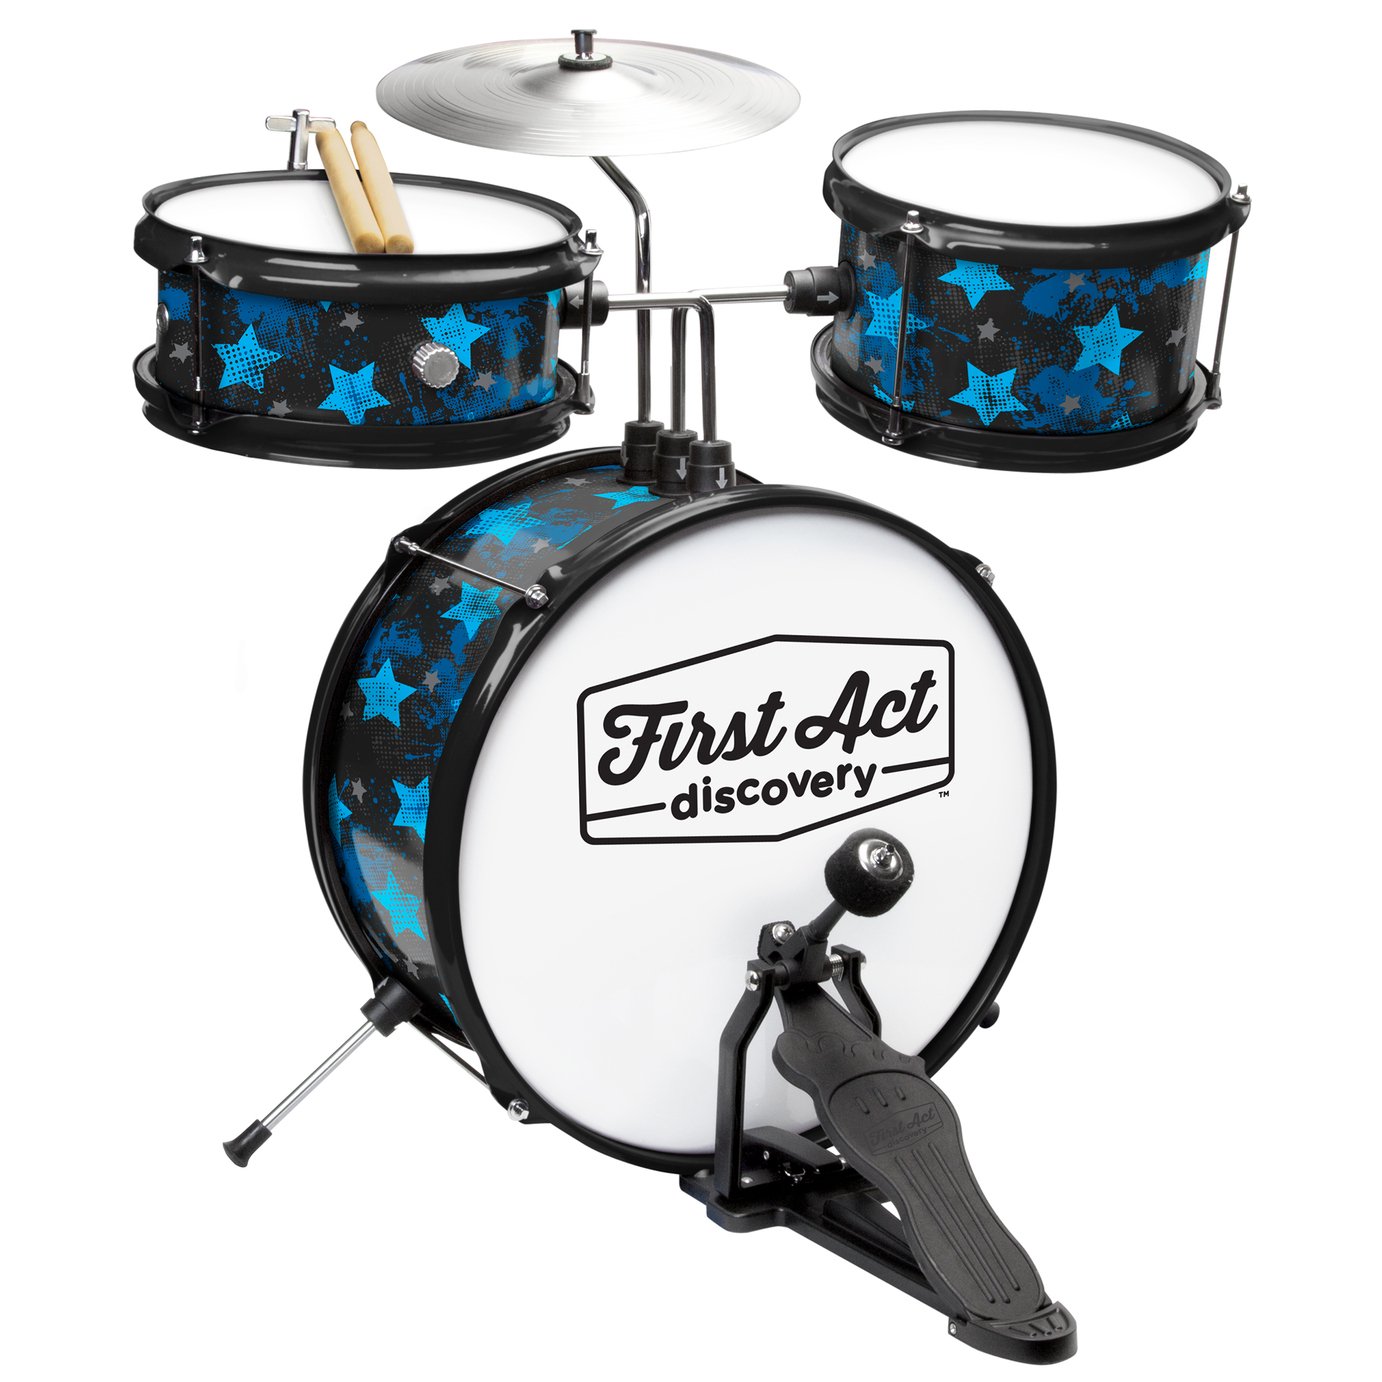 First Act Drum Kit Review